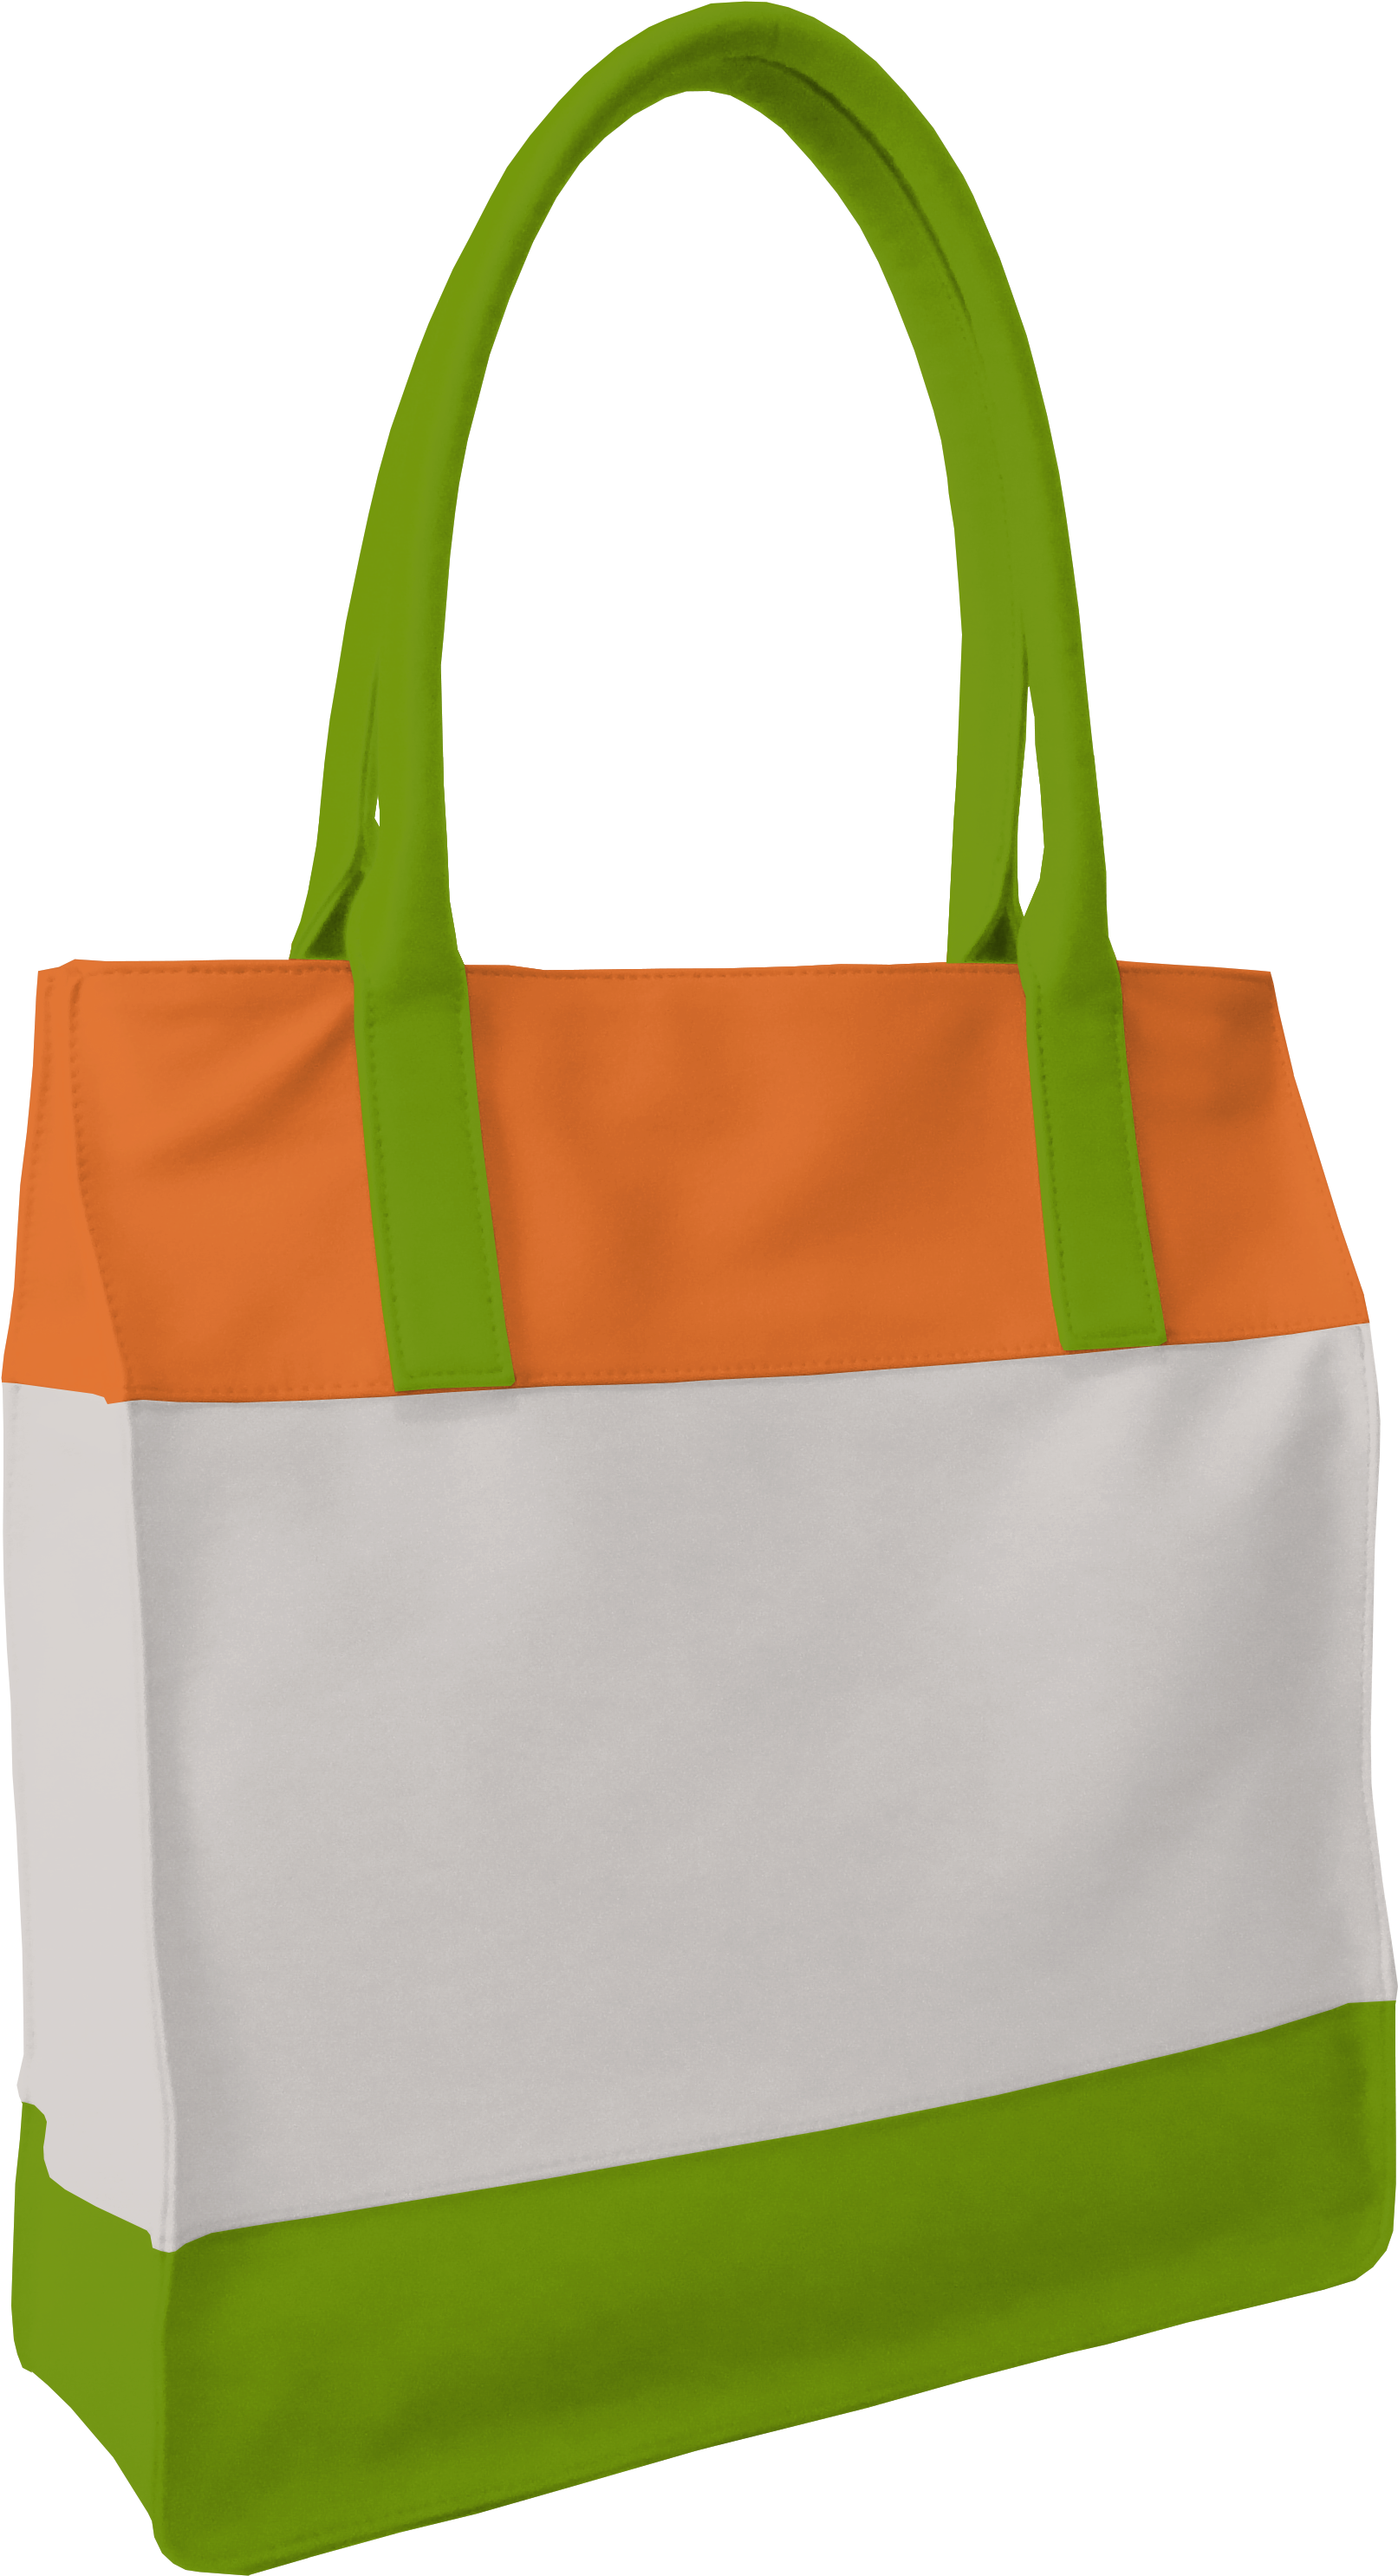 A White And Orange Bag With Green Handles